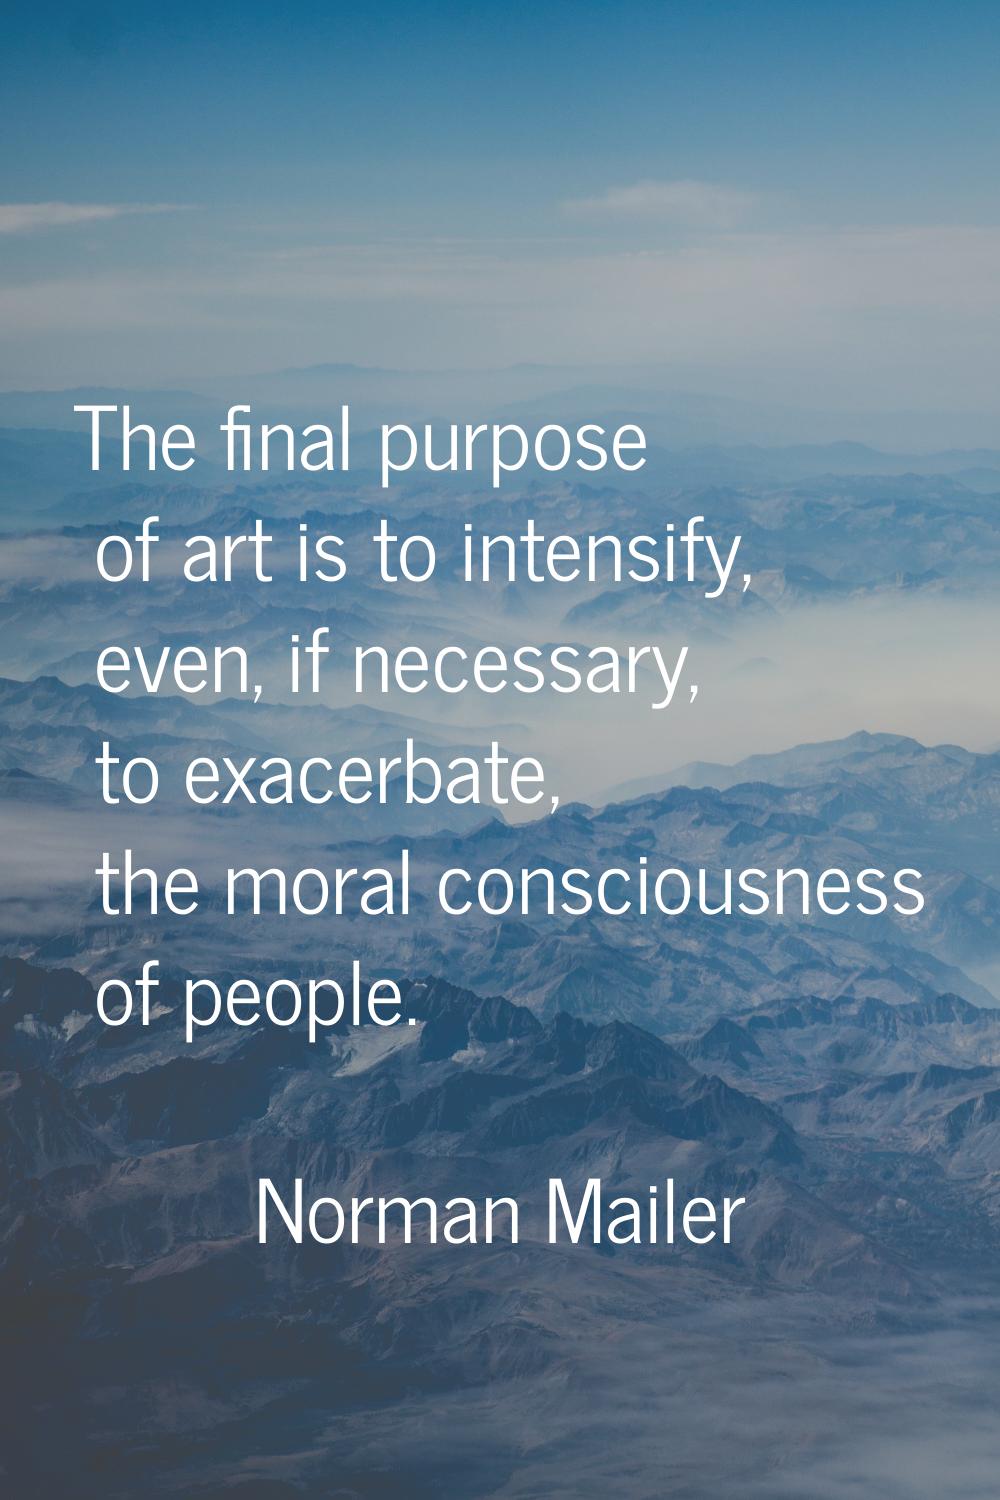 The final purpose of art is to intensify, even, if necessary, to exacerbate, the moral consciousnes